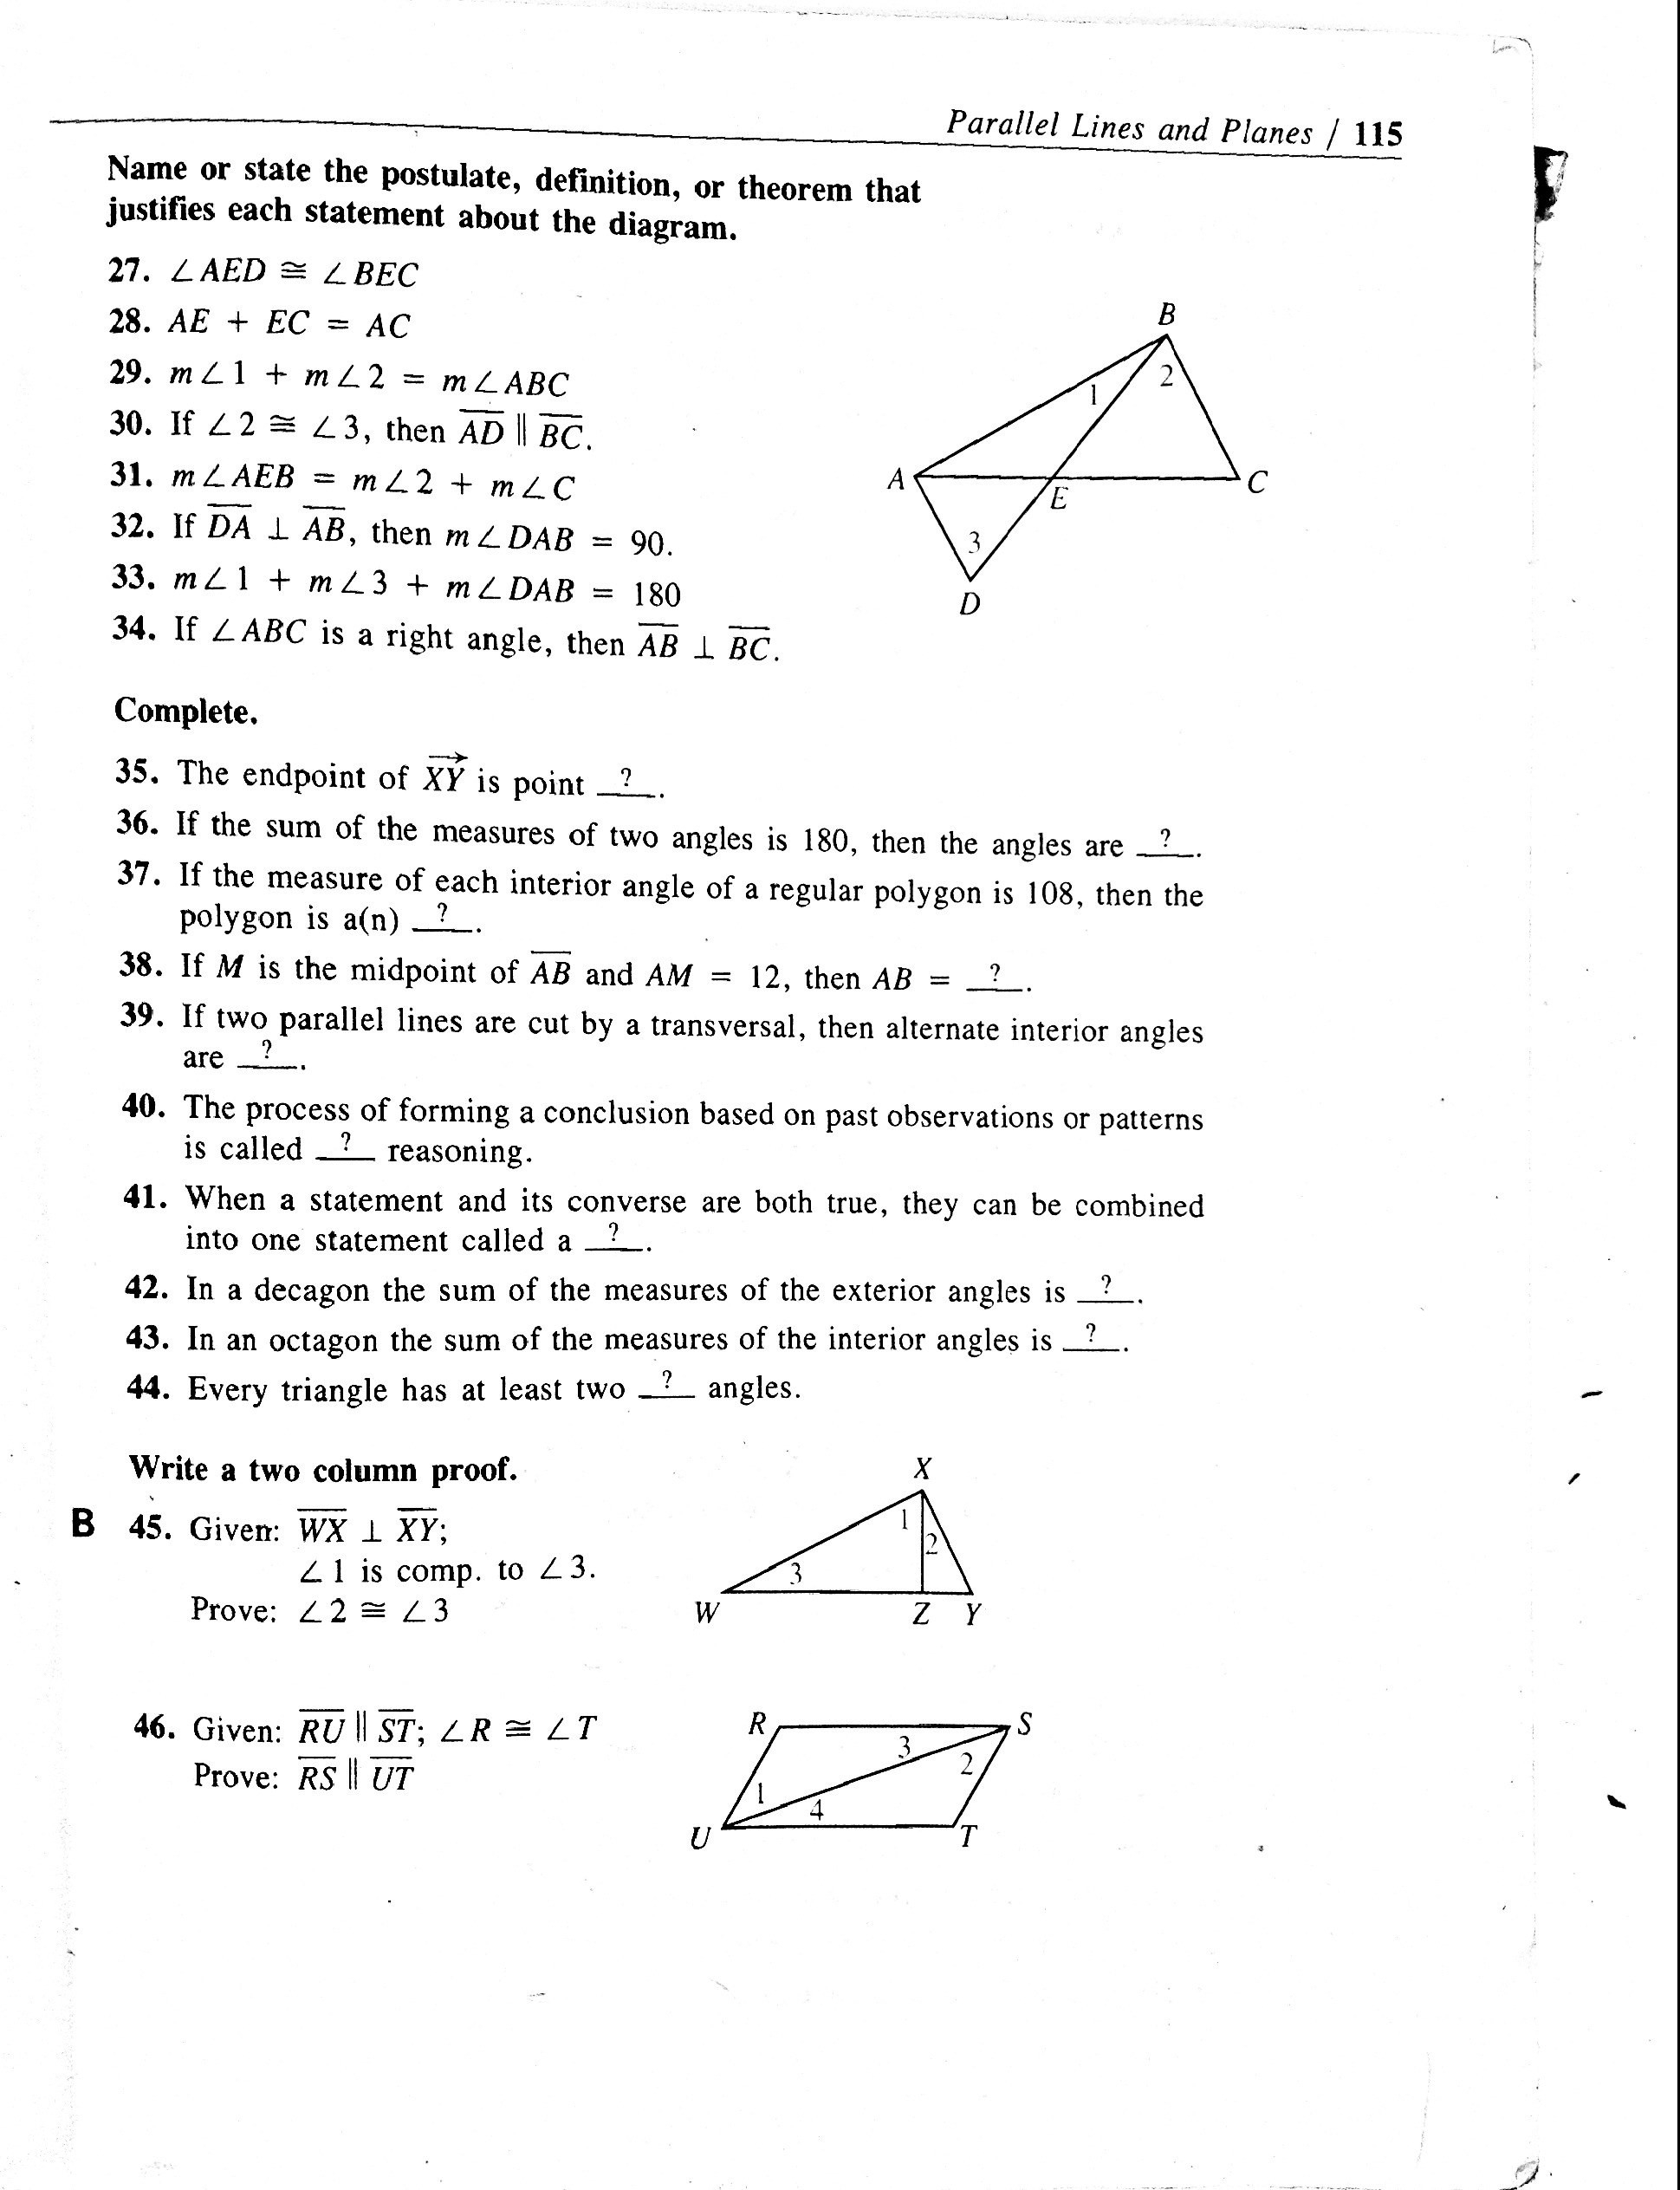 Worksheet Triangle Sum And Exterior Angle Theorem Answer Key Db excel